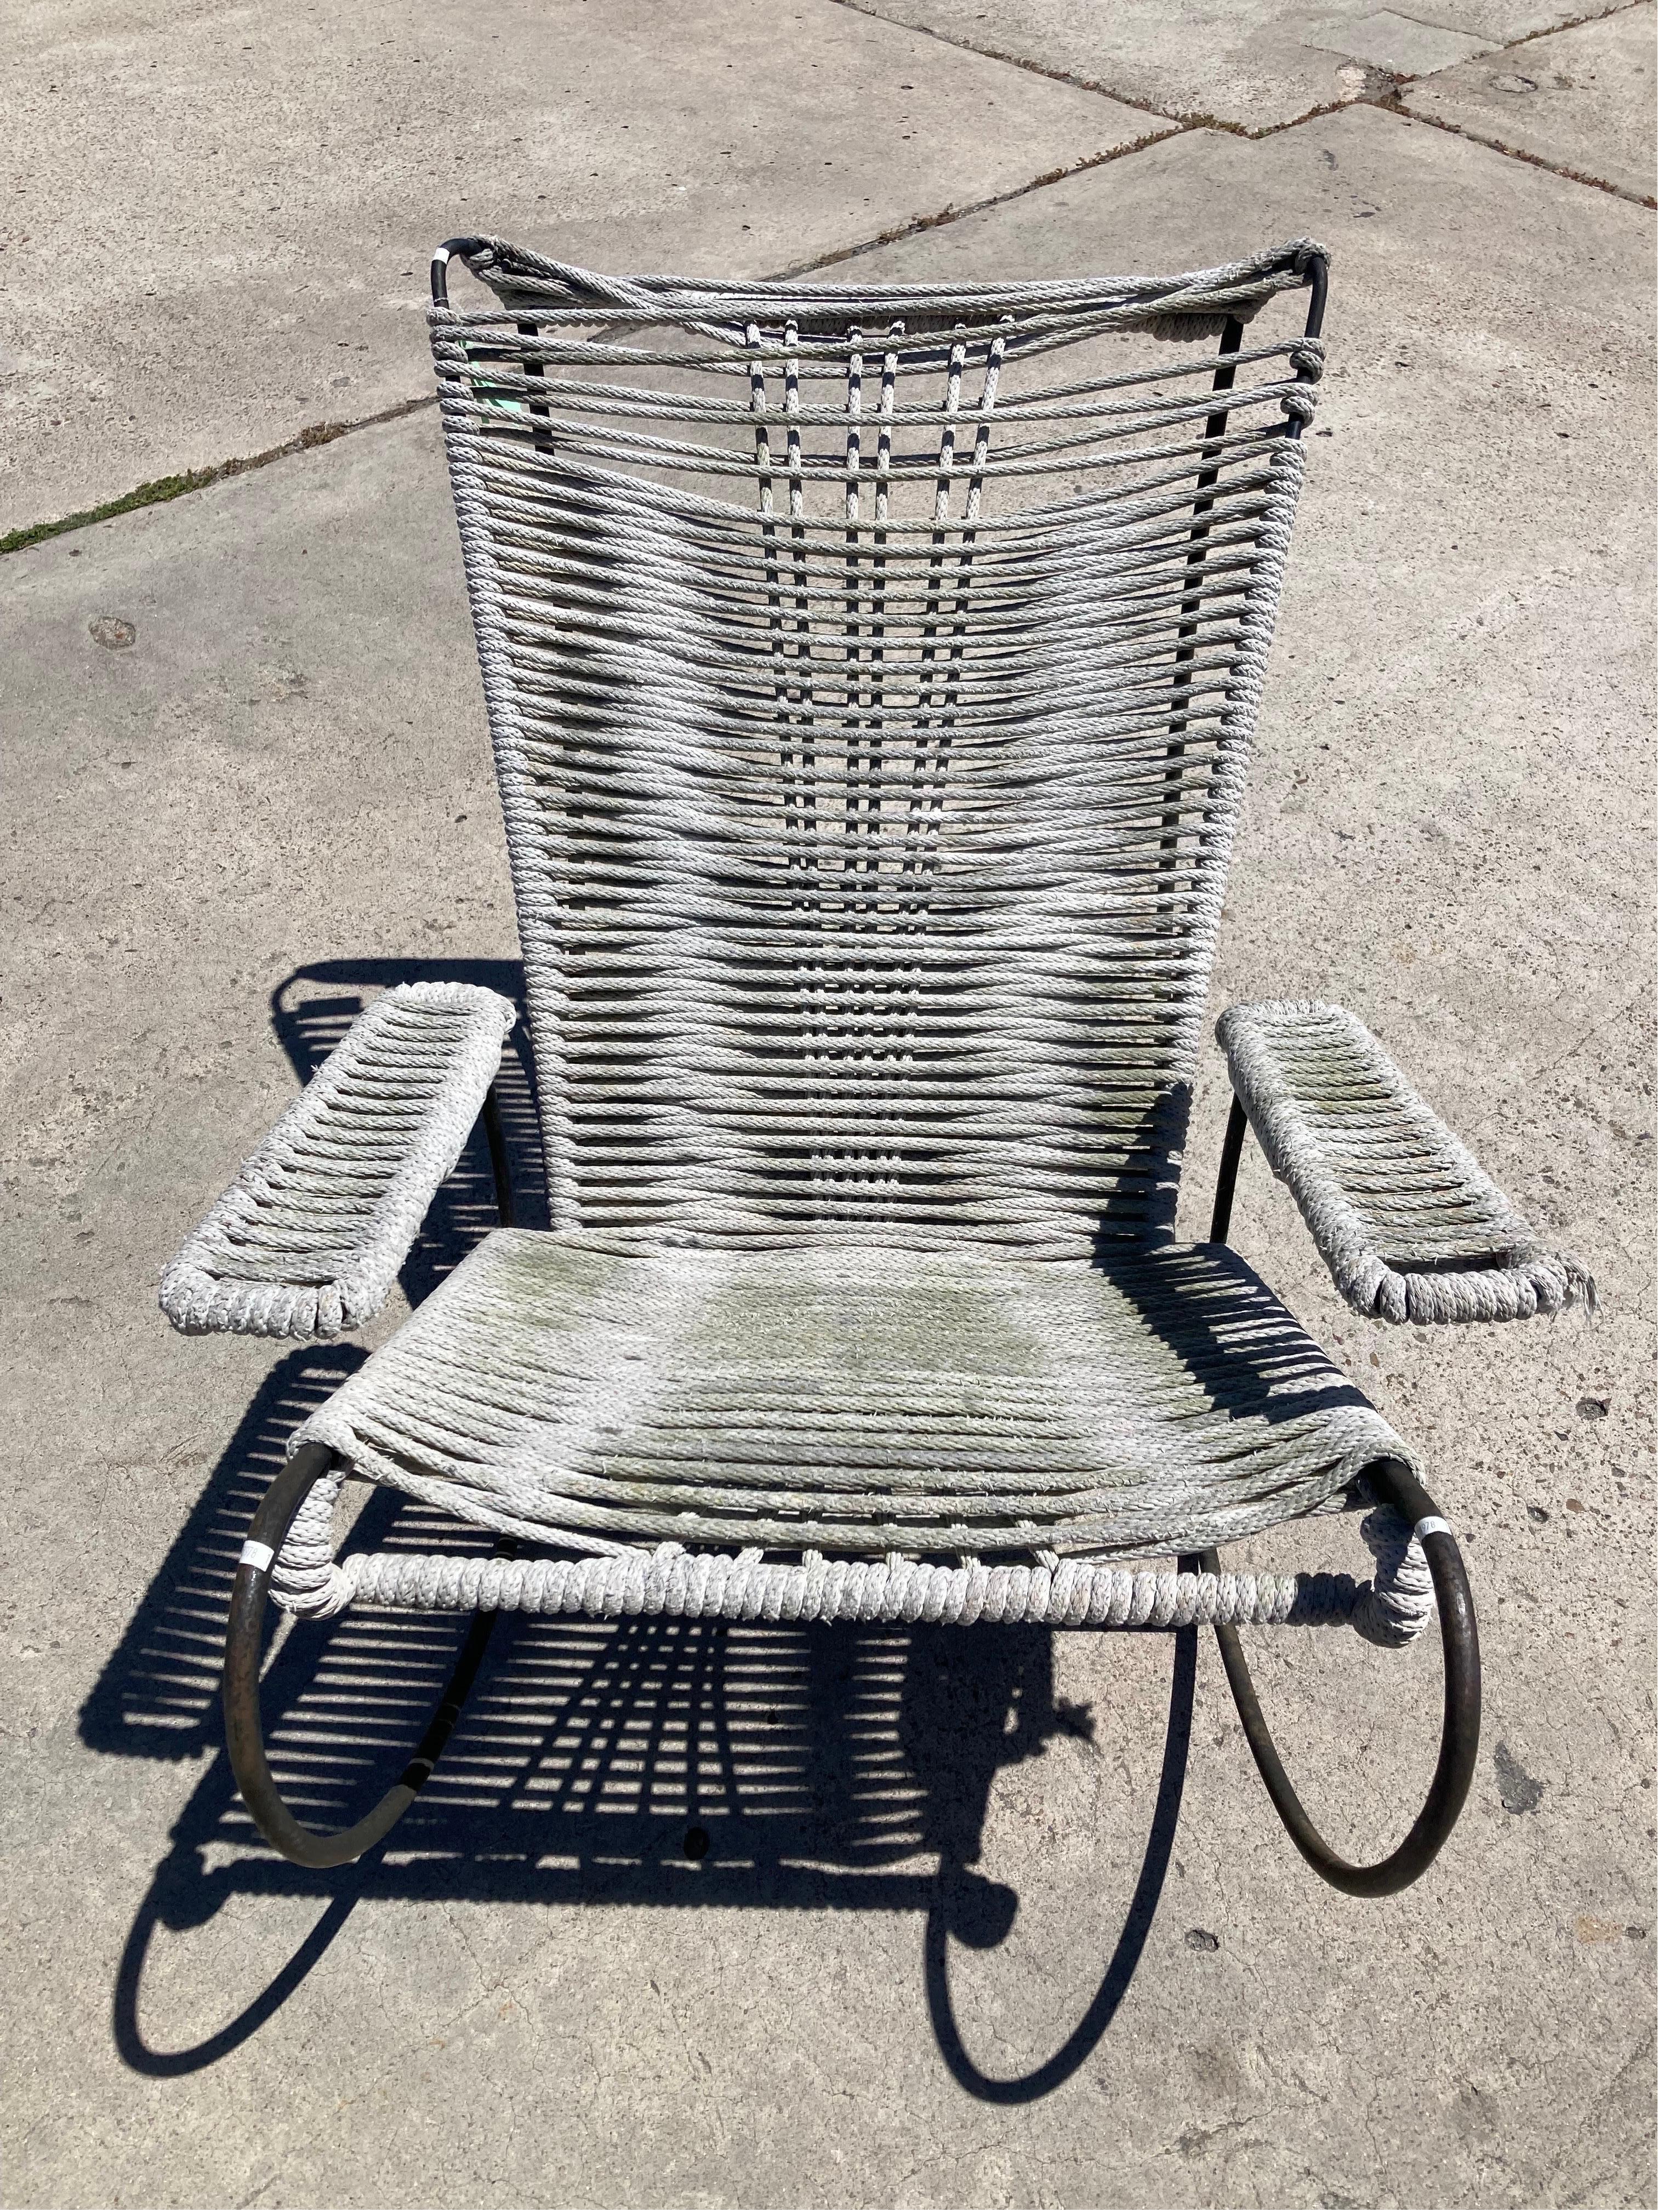 This Blackman Cruz Acapulco Rocker is an incredible example of modern design and is an extremely comfortable chair to relax in. The metal runners rock smoothly and the hand pulled rope gives the feeling of floating in mid-air. I have six available.